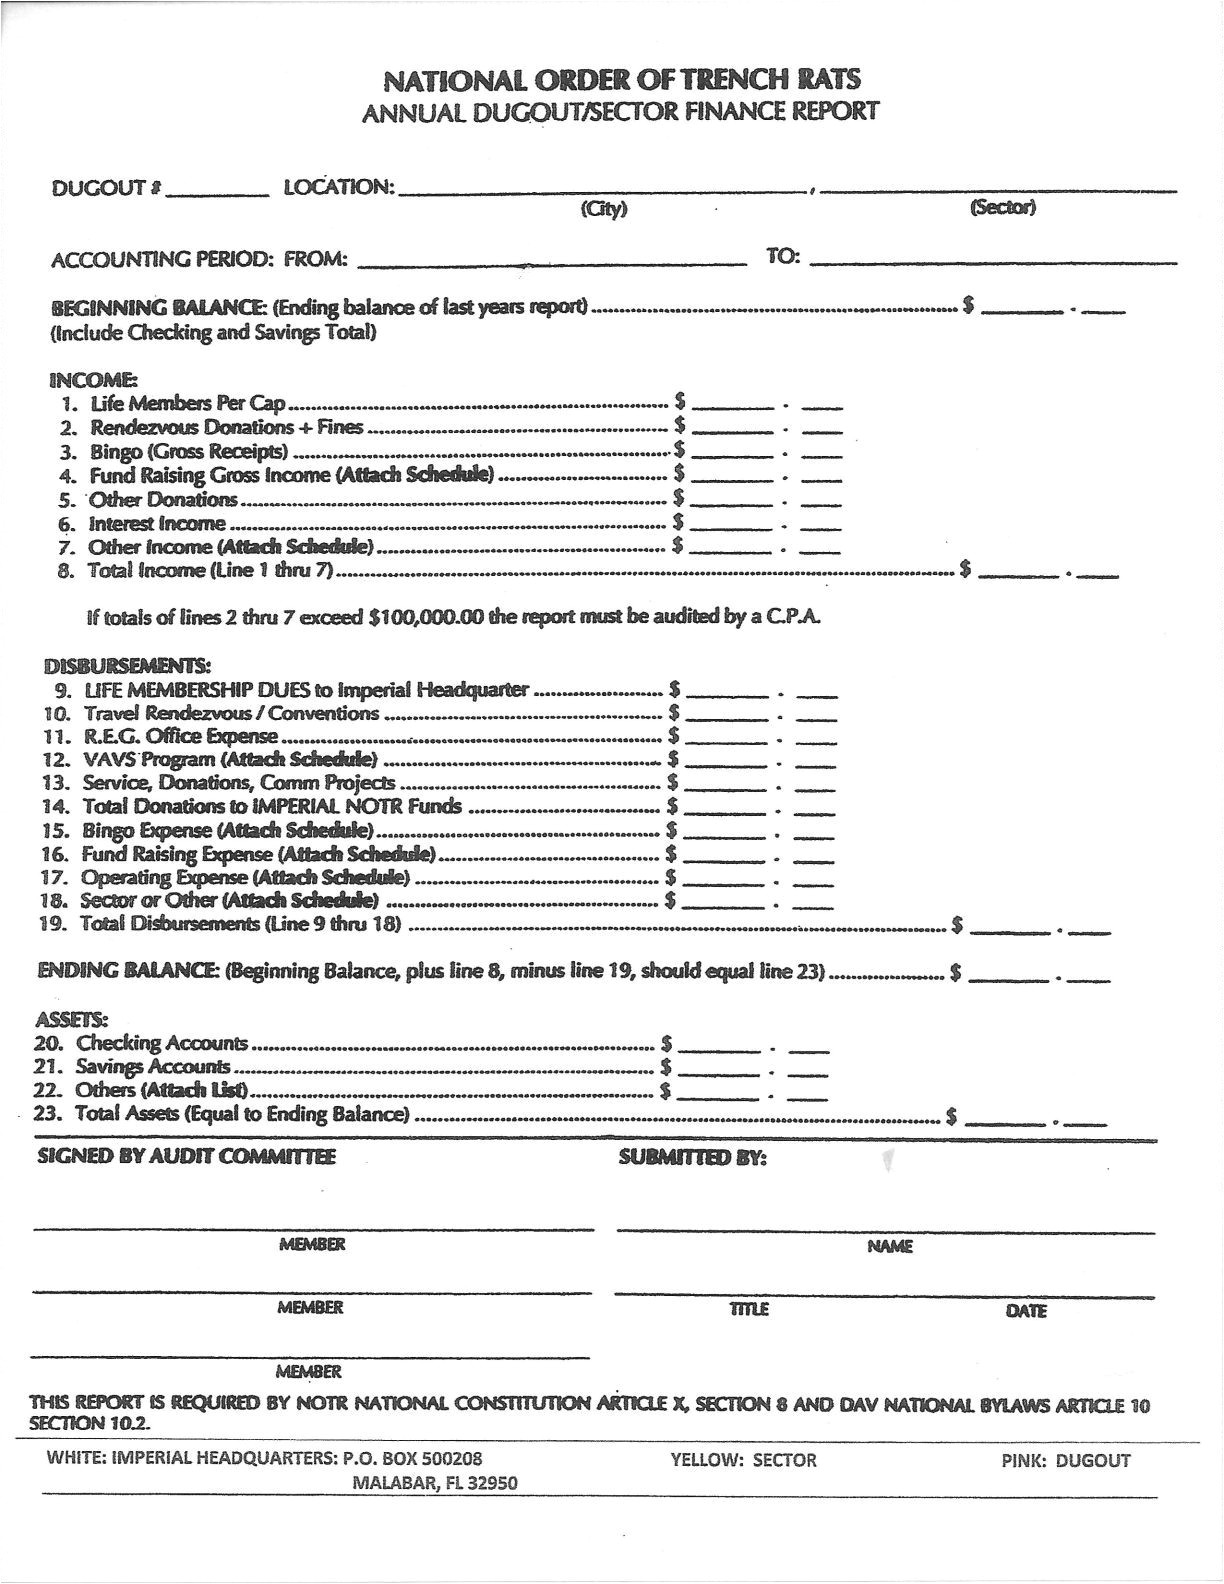 statement of cash receipts and disbursements template 2018 5 request for contract approval 6th bde jrotc supply